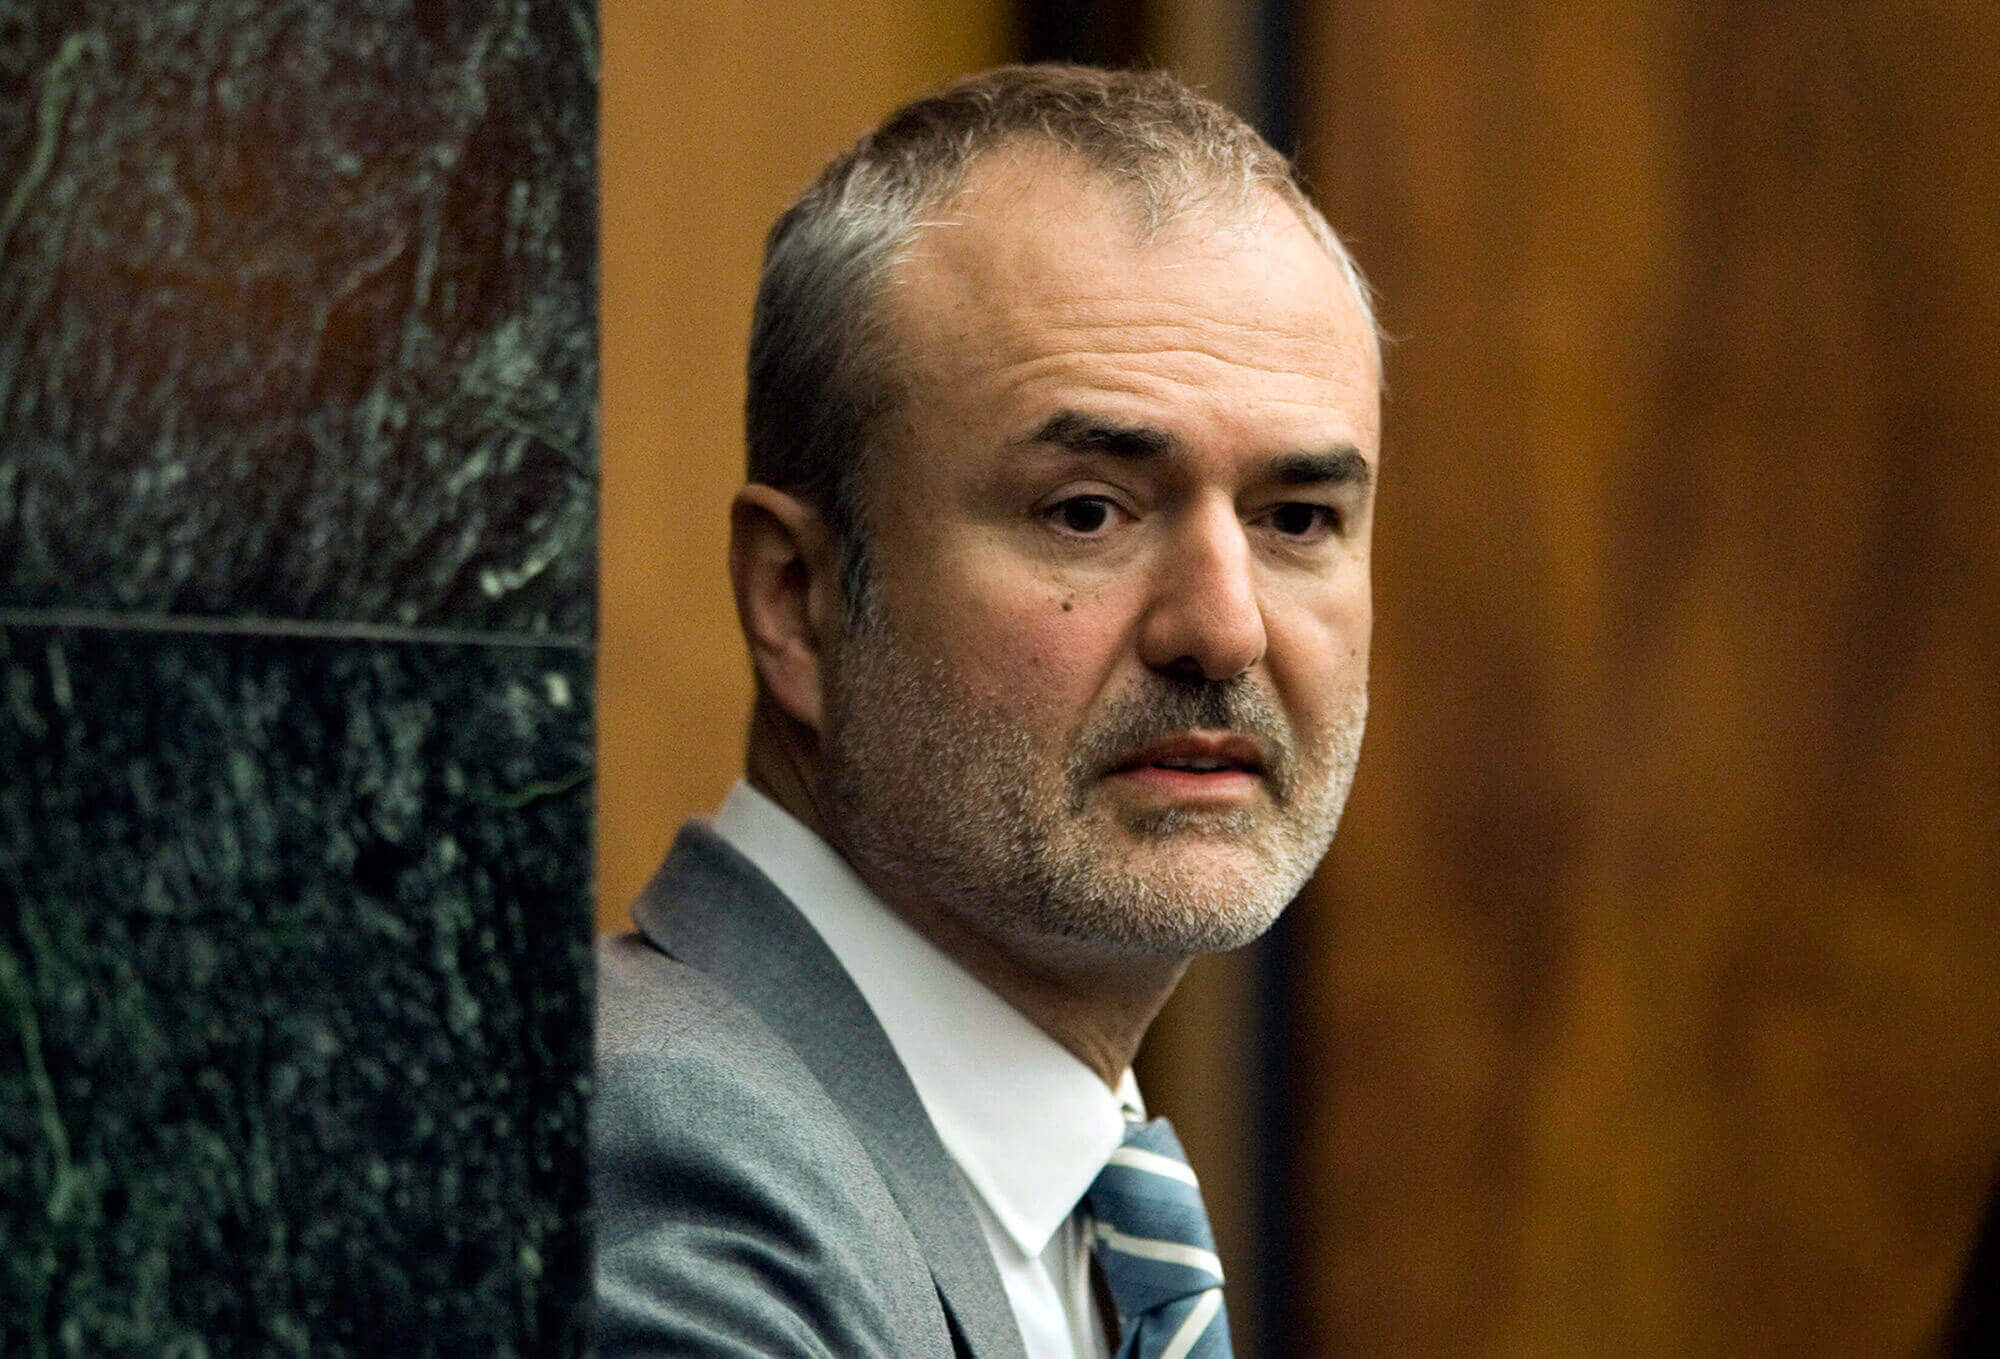 Image of Nick Denton in courtroom after sale of Gawker